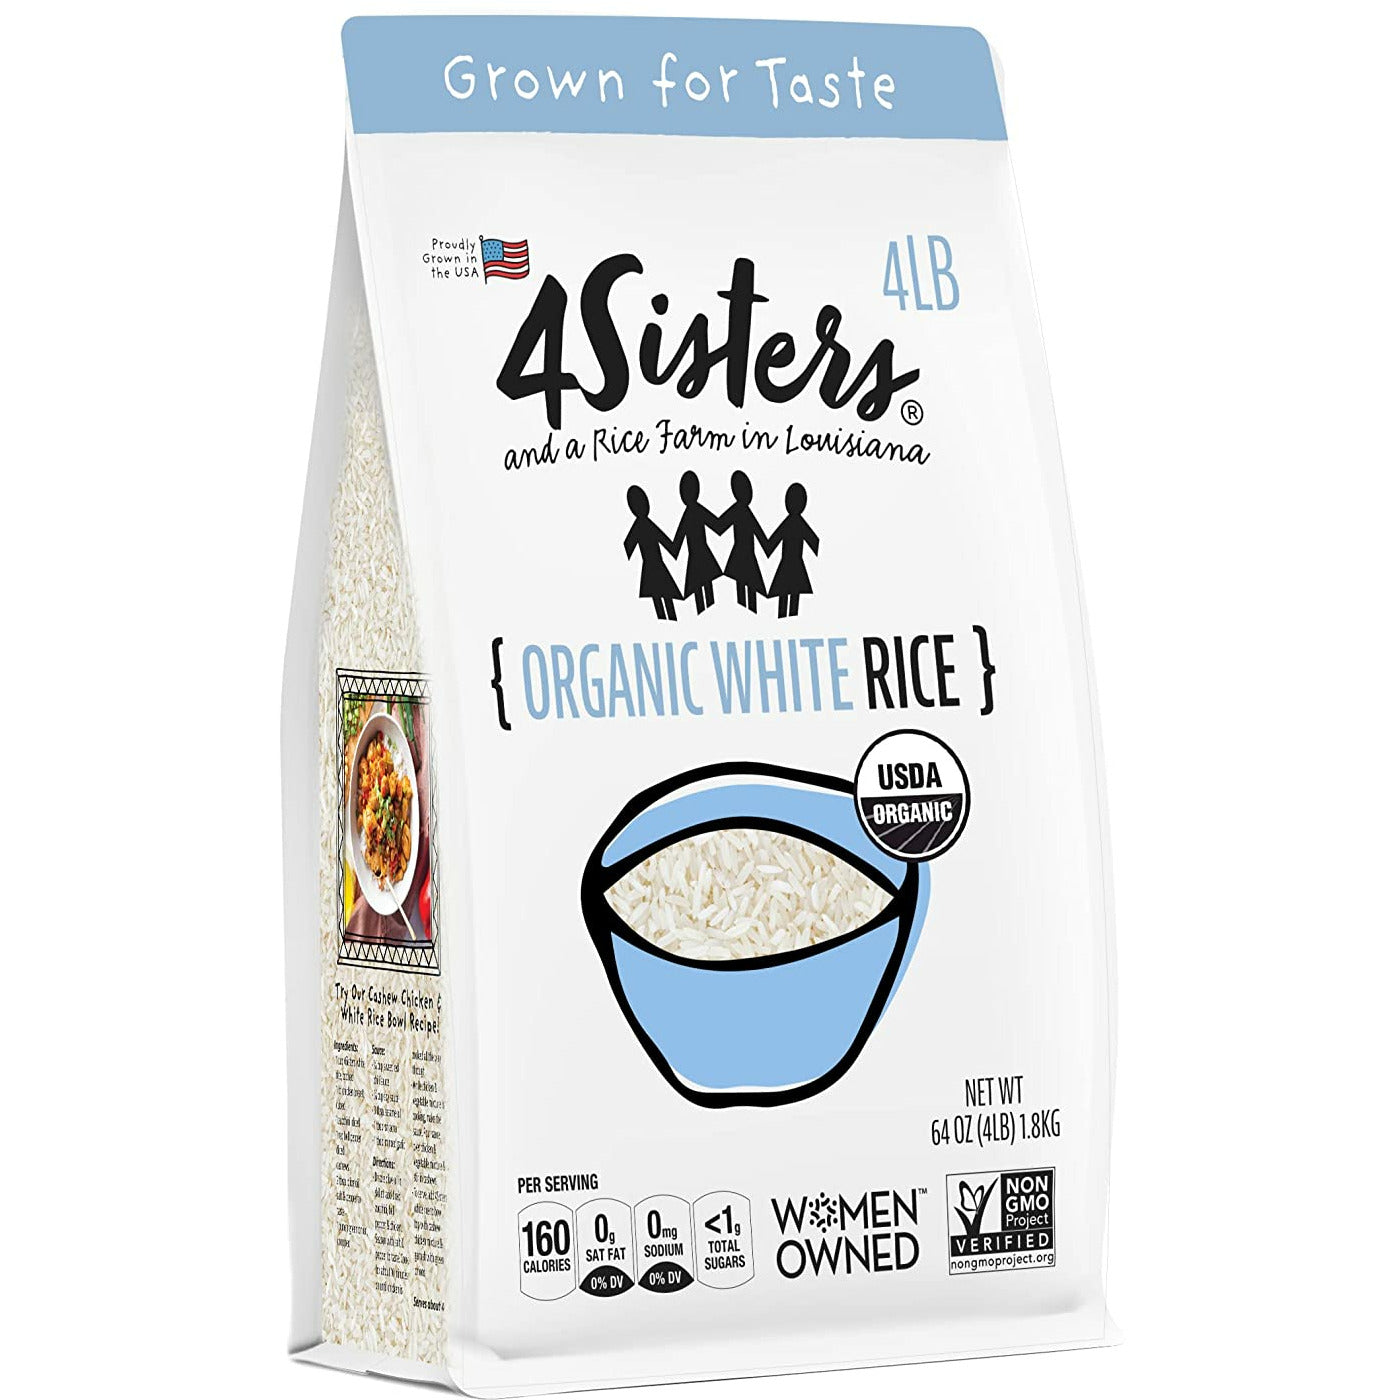 4 Sisters Long Grain White Rice - Organic - USA Grown - Sustainably Grown - Farm to Table - Woman Owned - 4 Pound